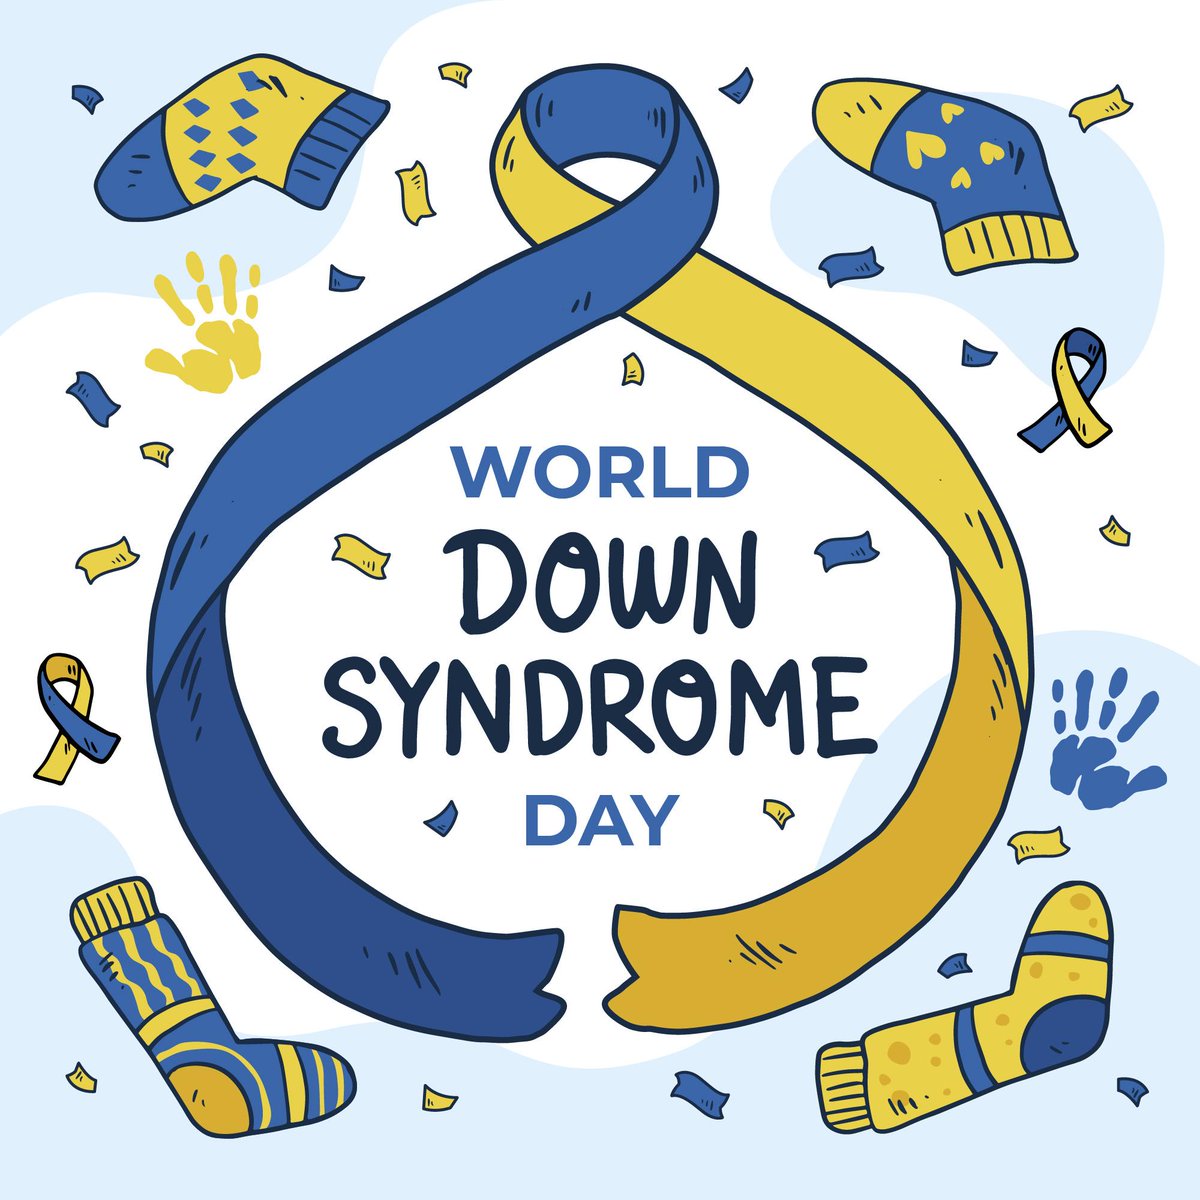 Today is #WorldDownSyndromeDay2024 a day to signify the uniqueness of the triplication of the 21st chromosome which causes Down syndrome. Help share the day to create a global voice advocating for the rights, inclusion & well-being of people with #DownSyndrome #LotsOfSocks